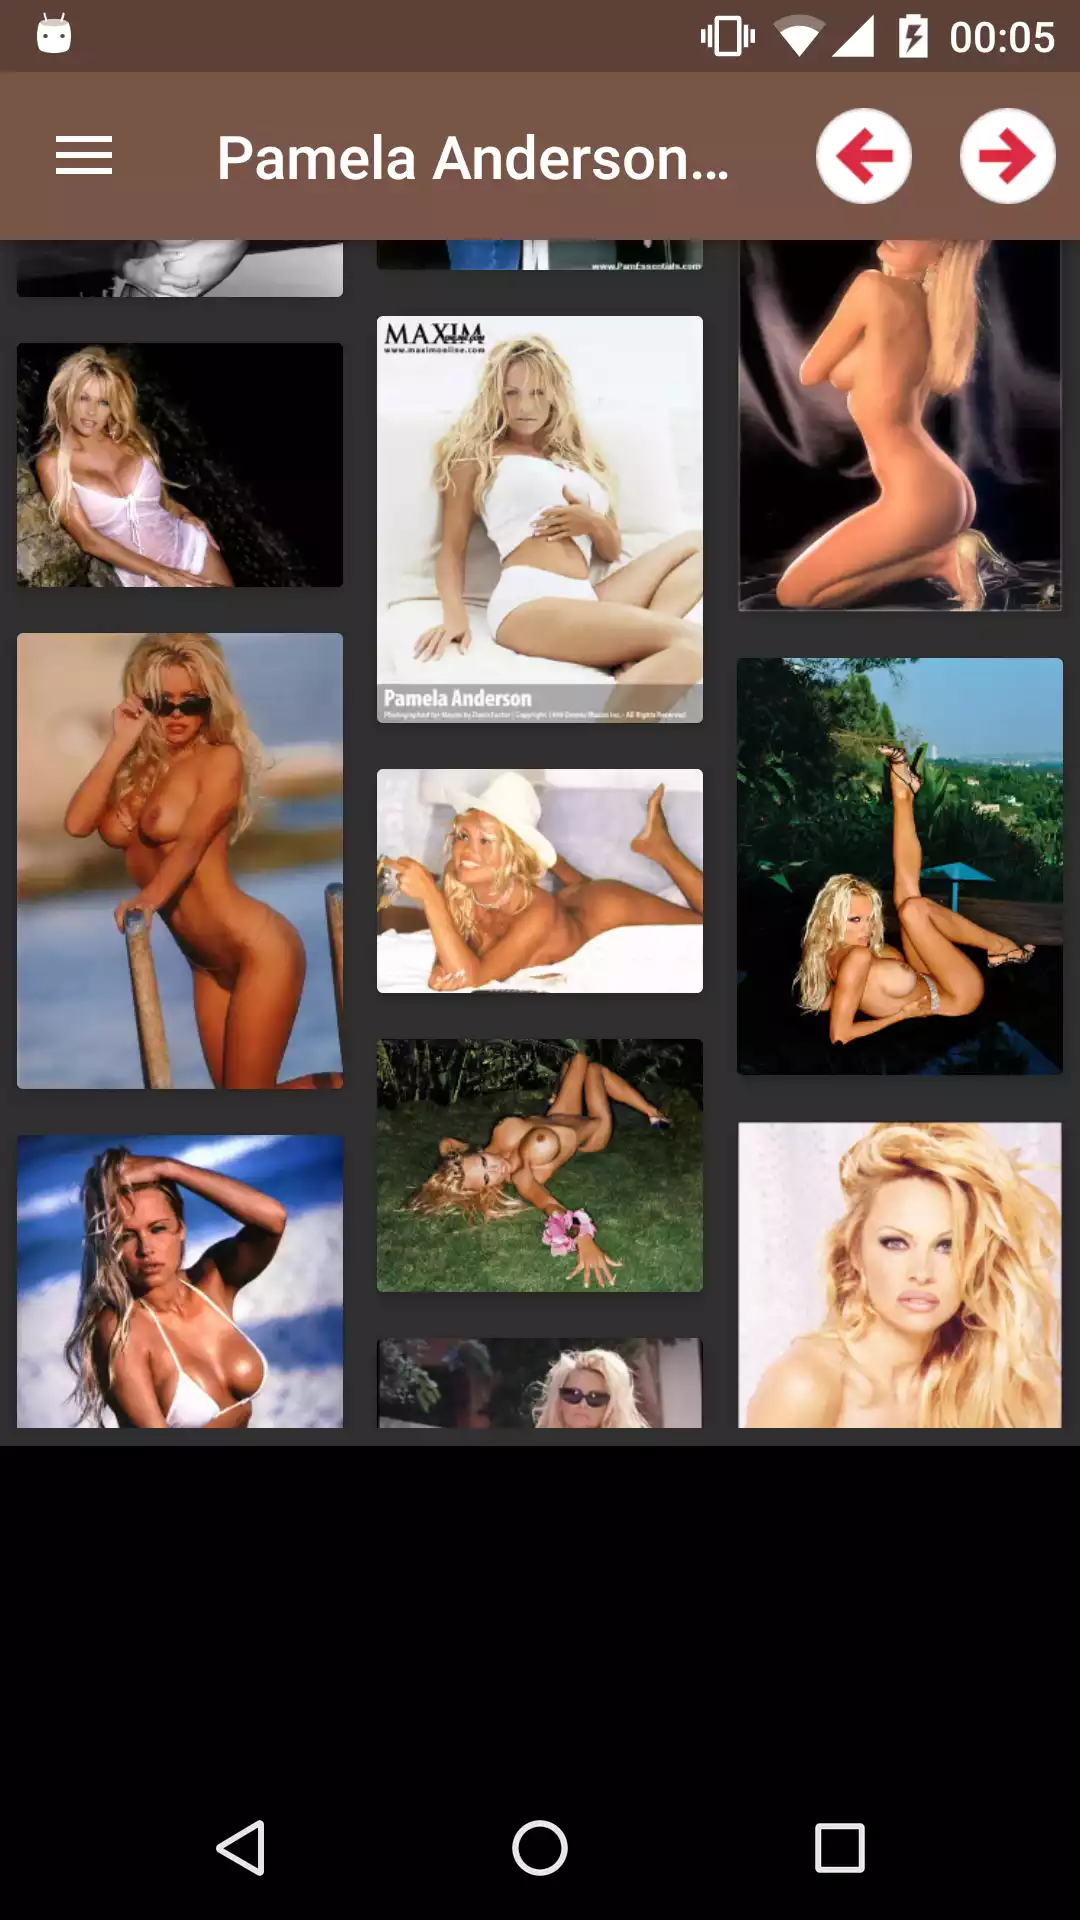 Pamela Anderson backgrounds lovely,download,mod,and,mature,galleries,porn,puzzles,erotic,images,android,daily,pornstar,apk,anderson,free,pamela,panties,hentai,video,sexy,backgrounds,photos,app,titties,apps,wallpapers,star